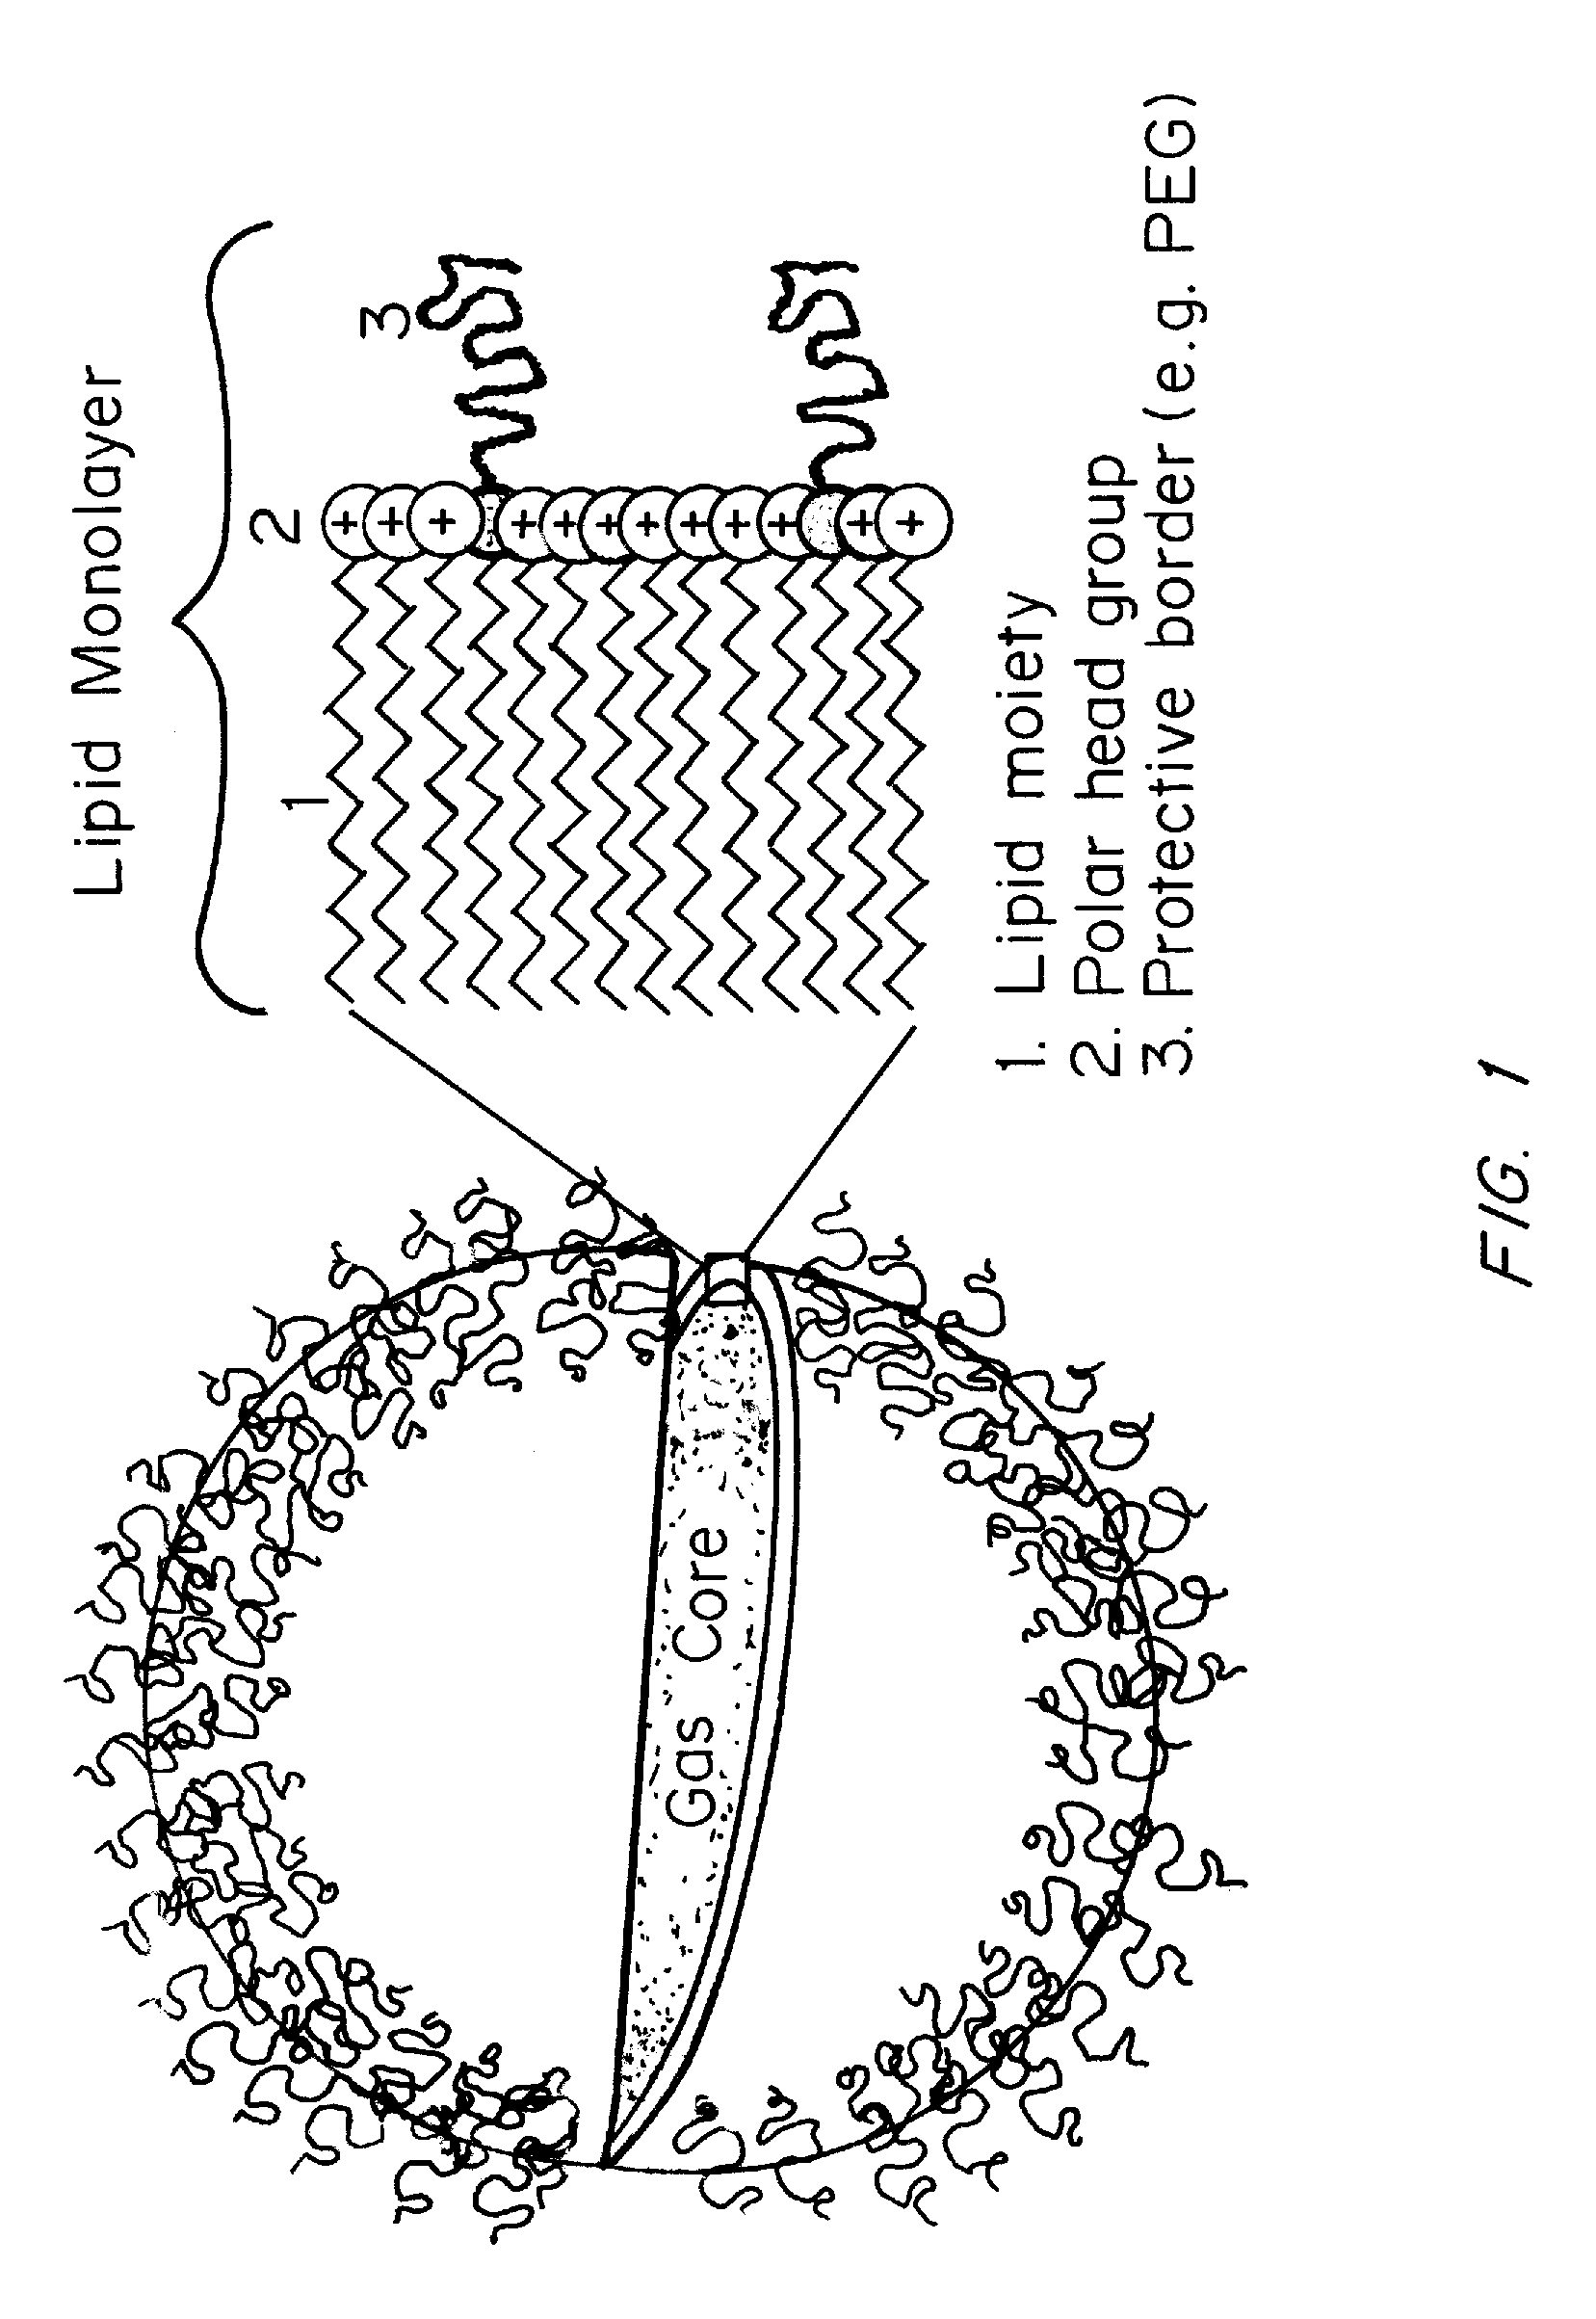 Microbubbles and methods for oxygen delivery